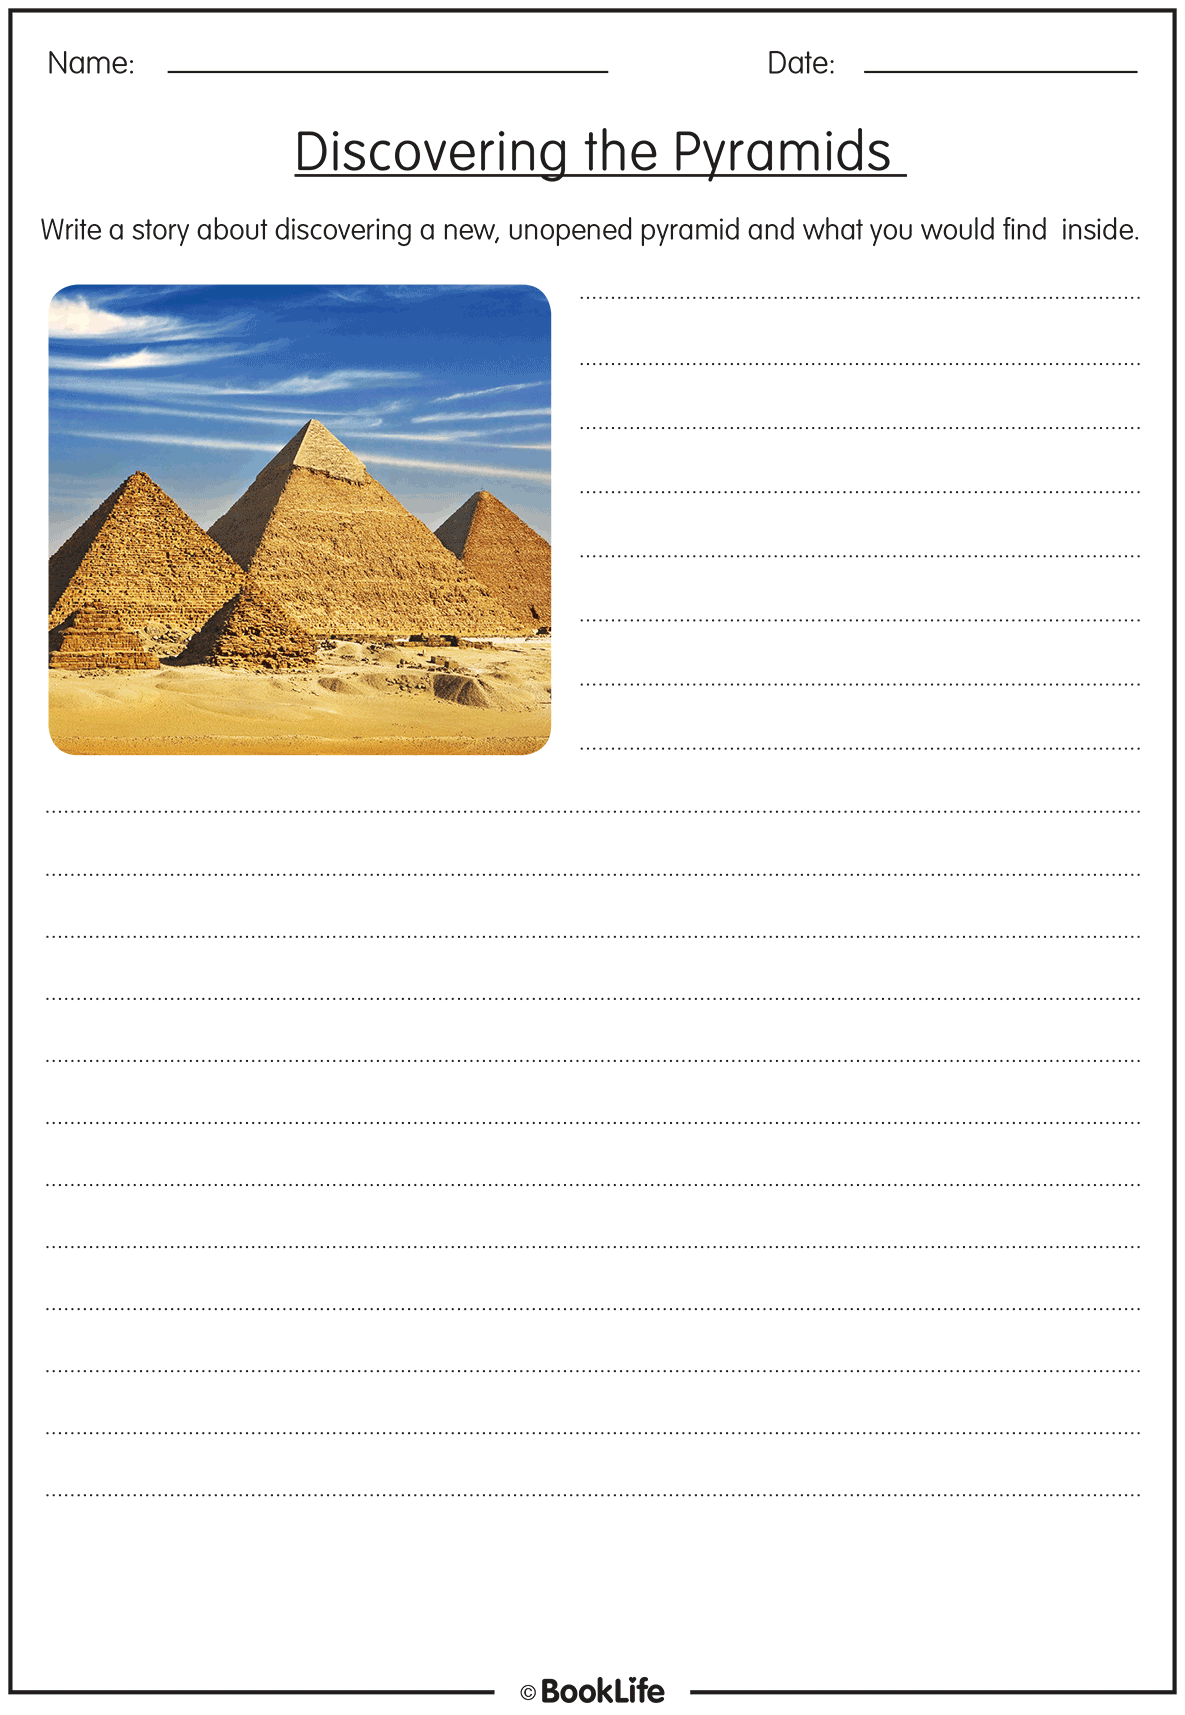 Ancient Egyptian Pyramids by BookLife